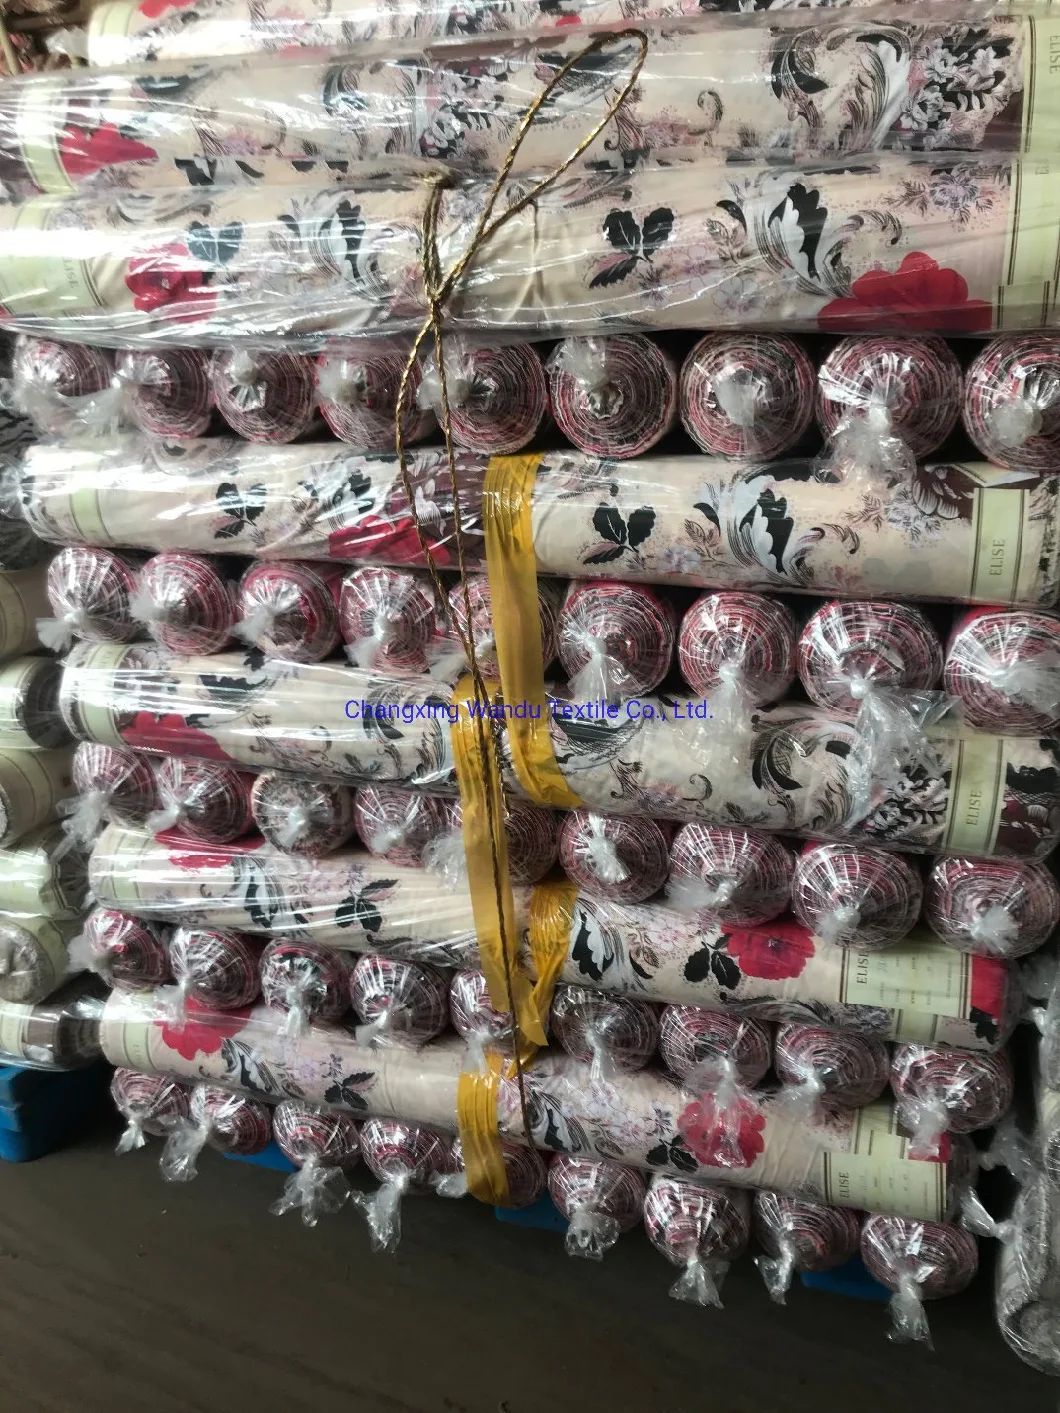 Printed Bedsheet Fabrics, Household Textiles Export, Chinese Manufacturers Manufacture and Export. The Latest Order Pattern in June